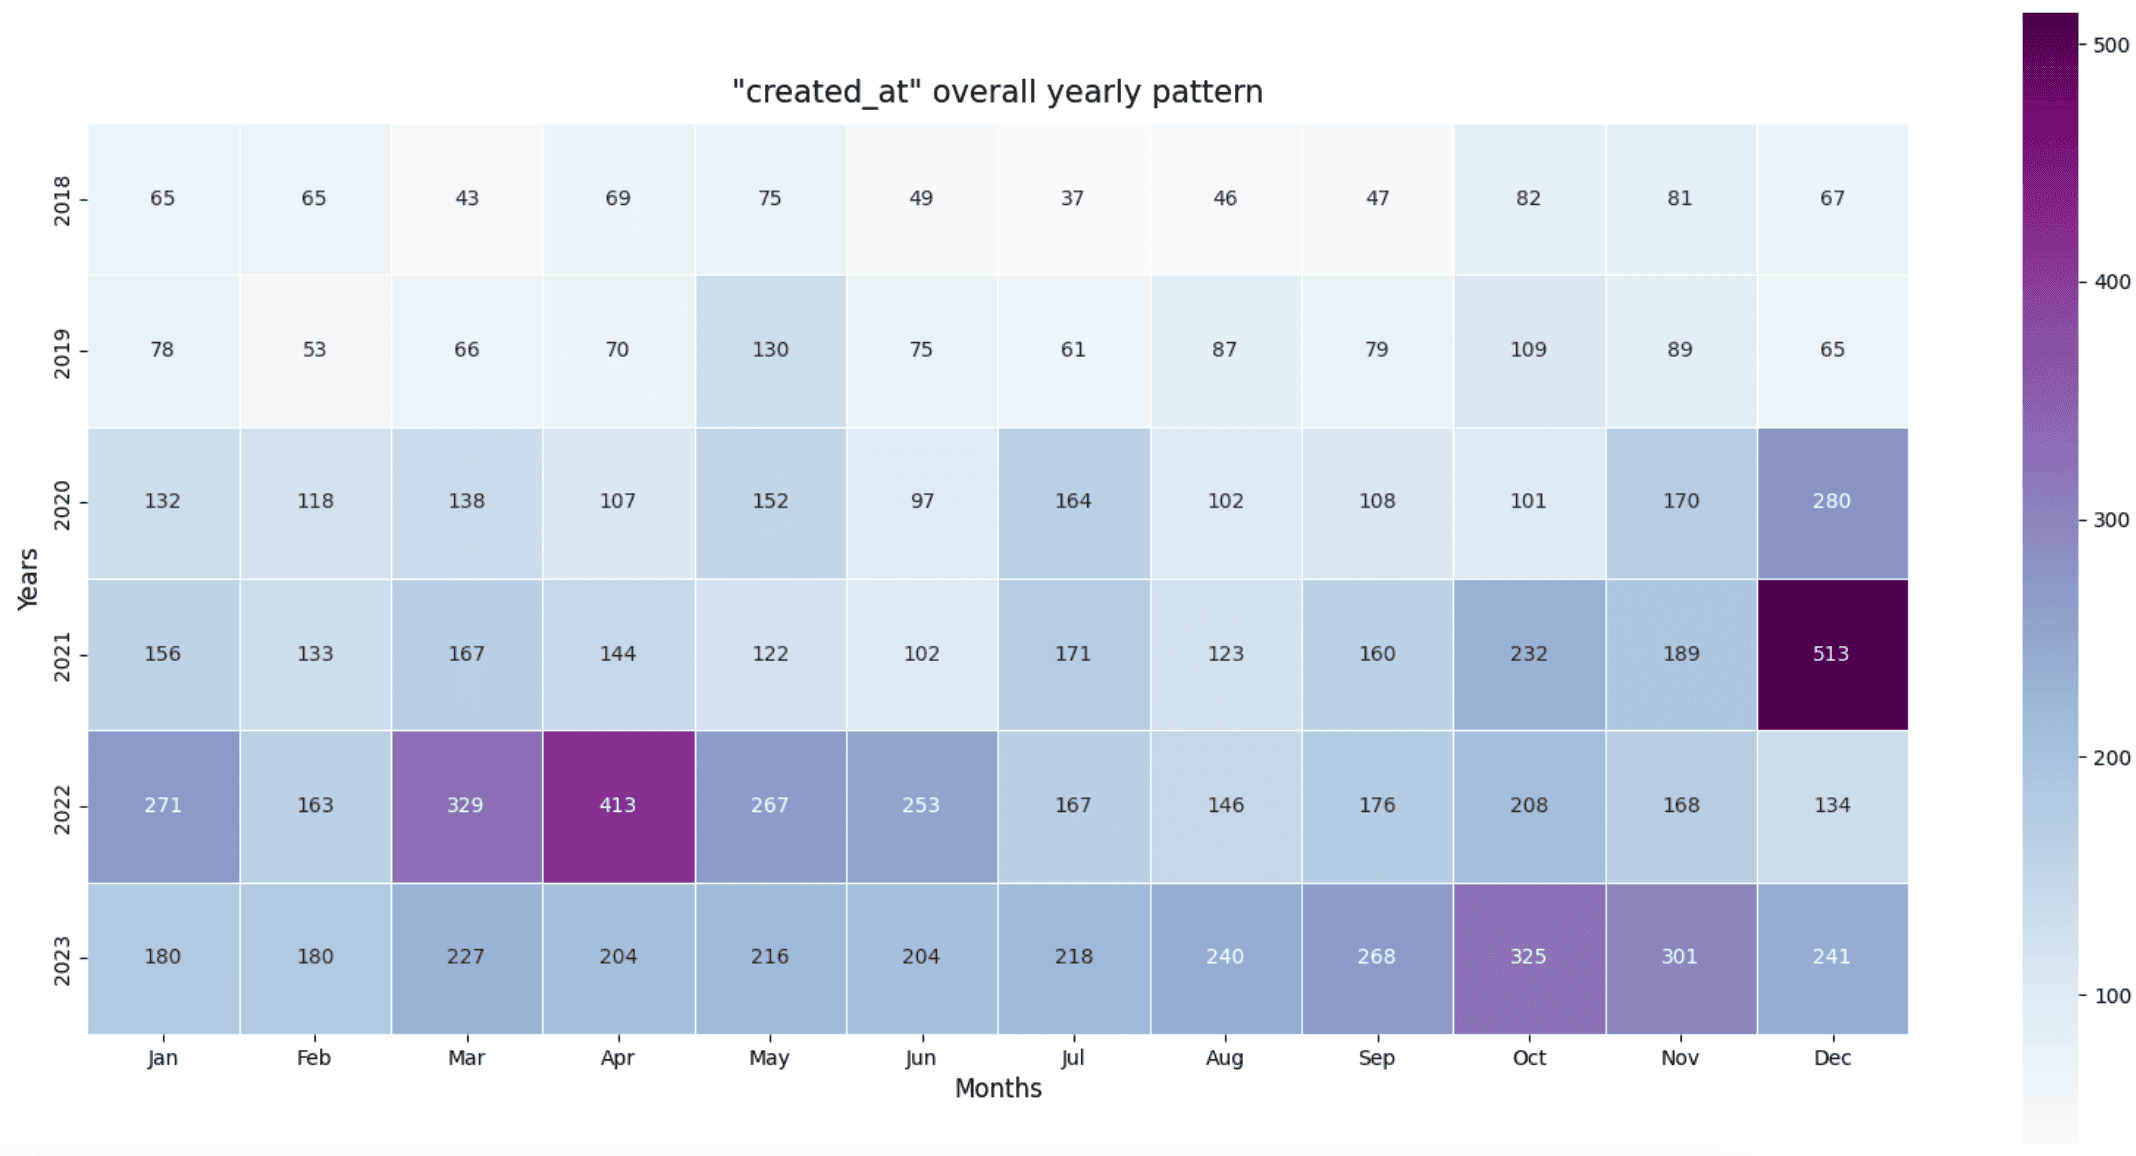 A heatmap visulaization which shows the count of repos for each month per year.